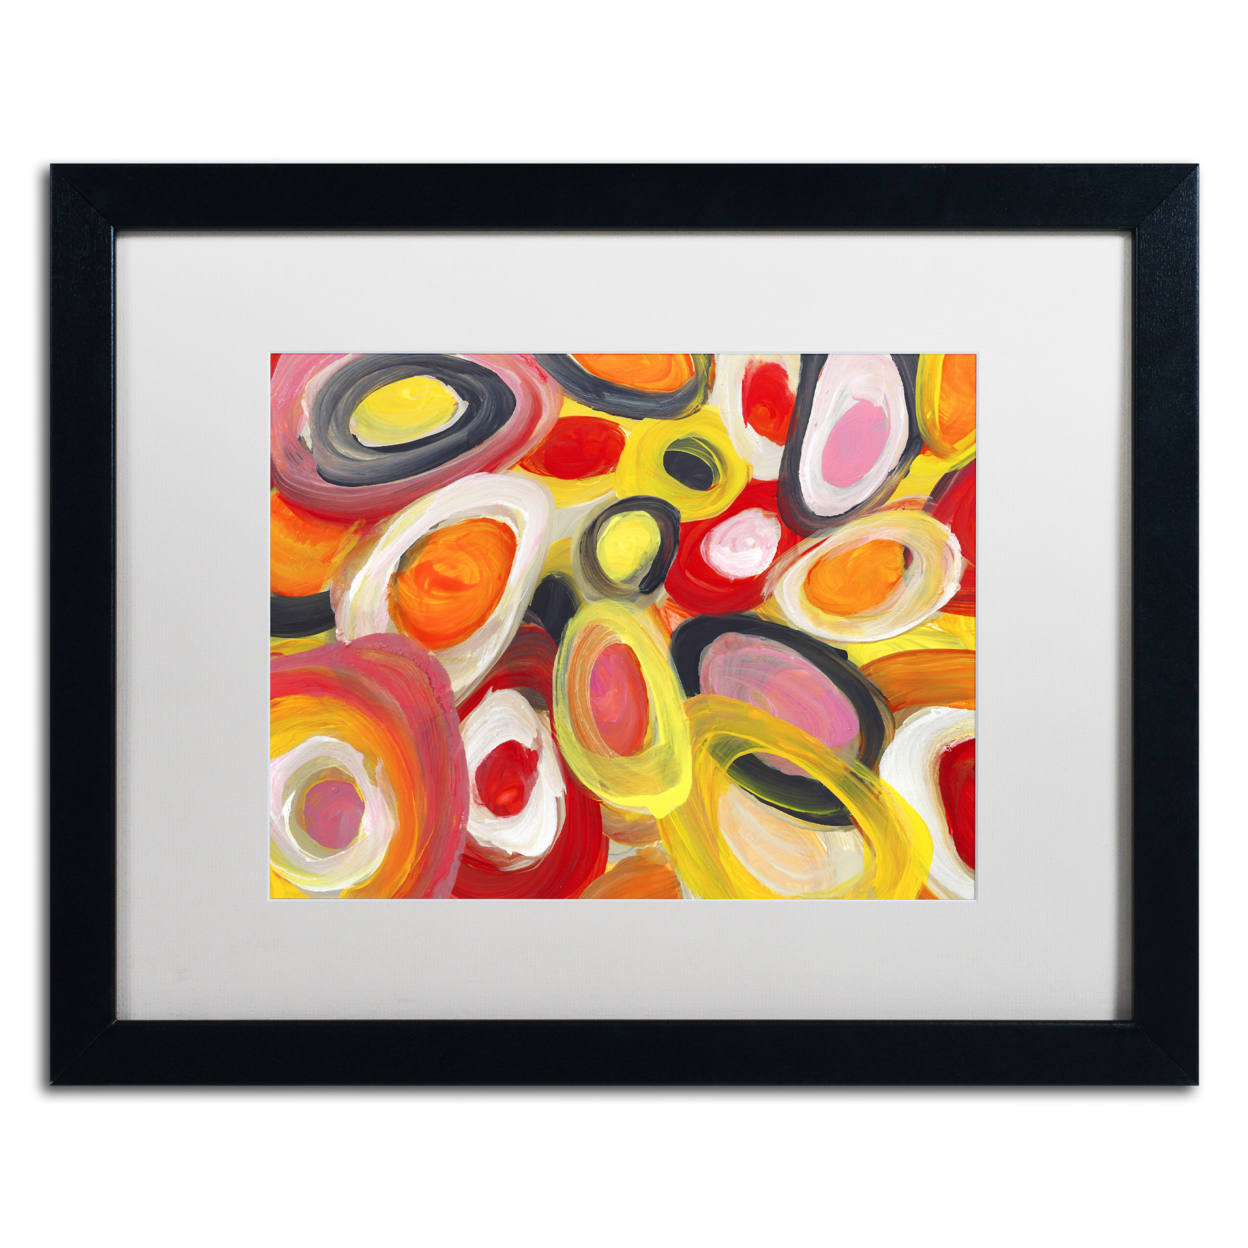 Amy Vangsgard 'Colorful Abstract Circles 2' Black Wooden Framed Art 18 X 22 Inches